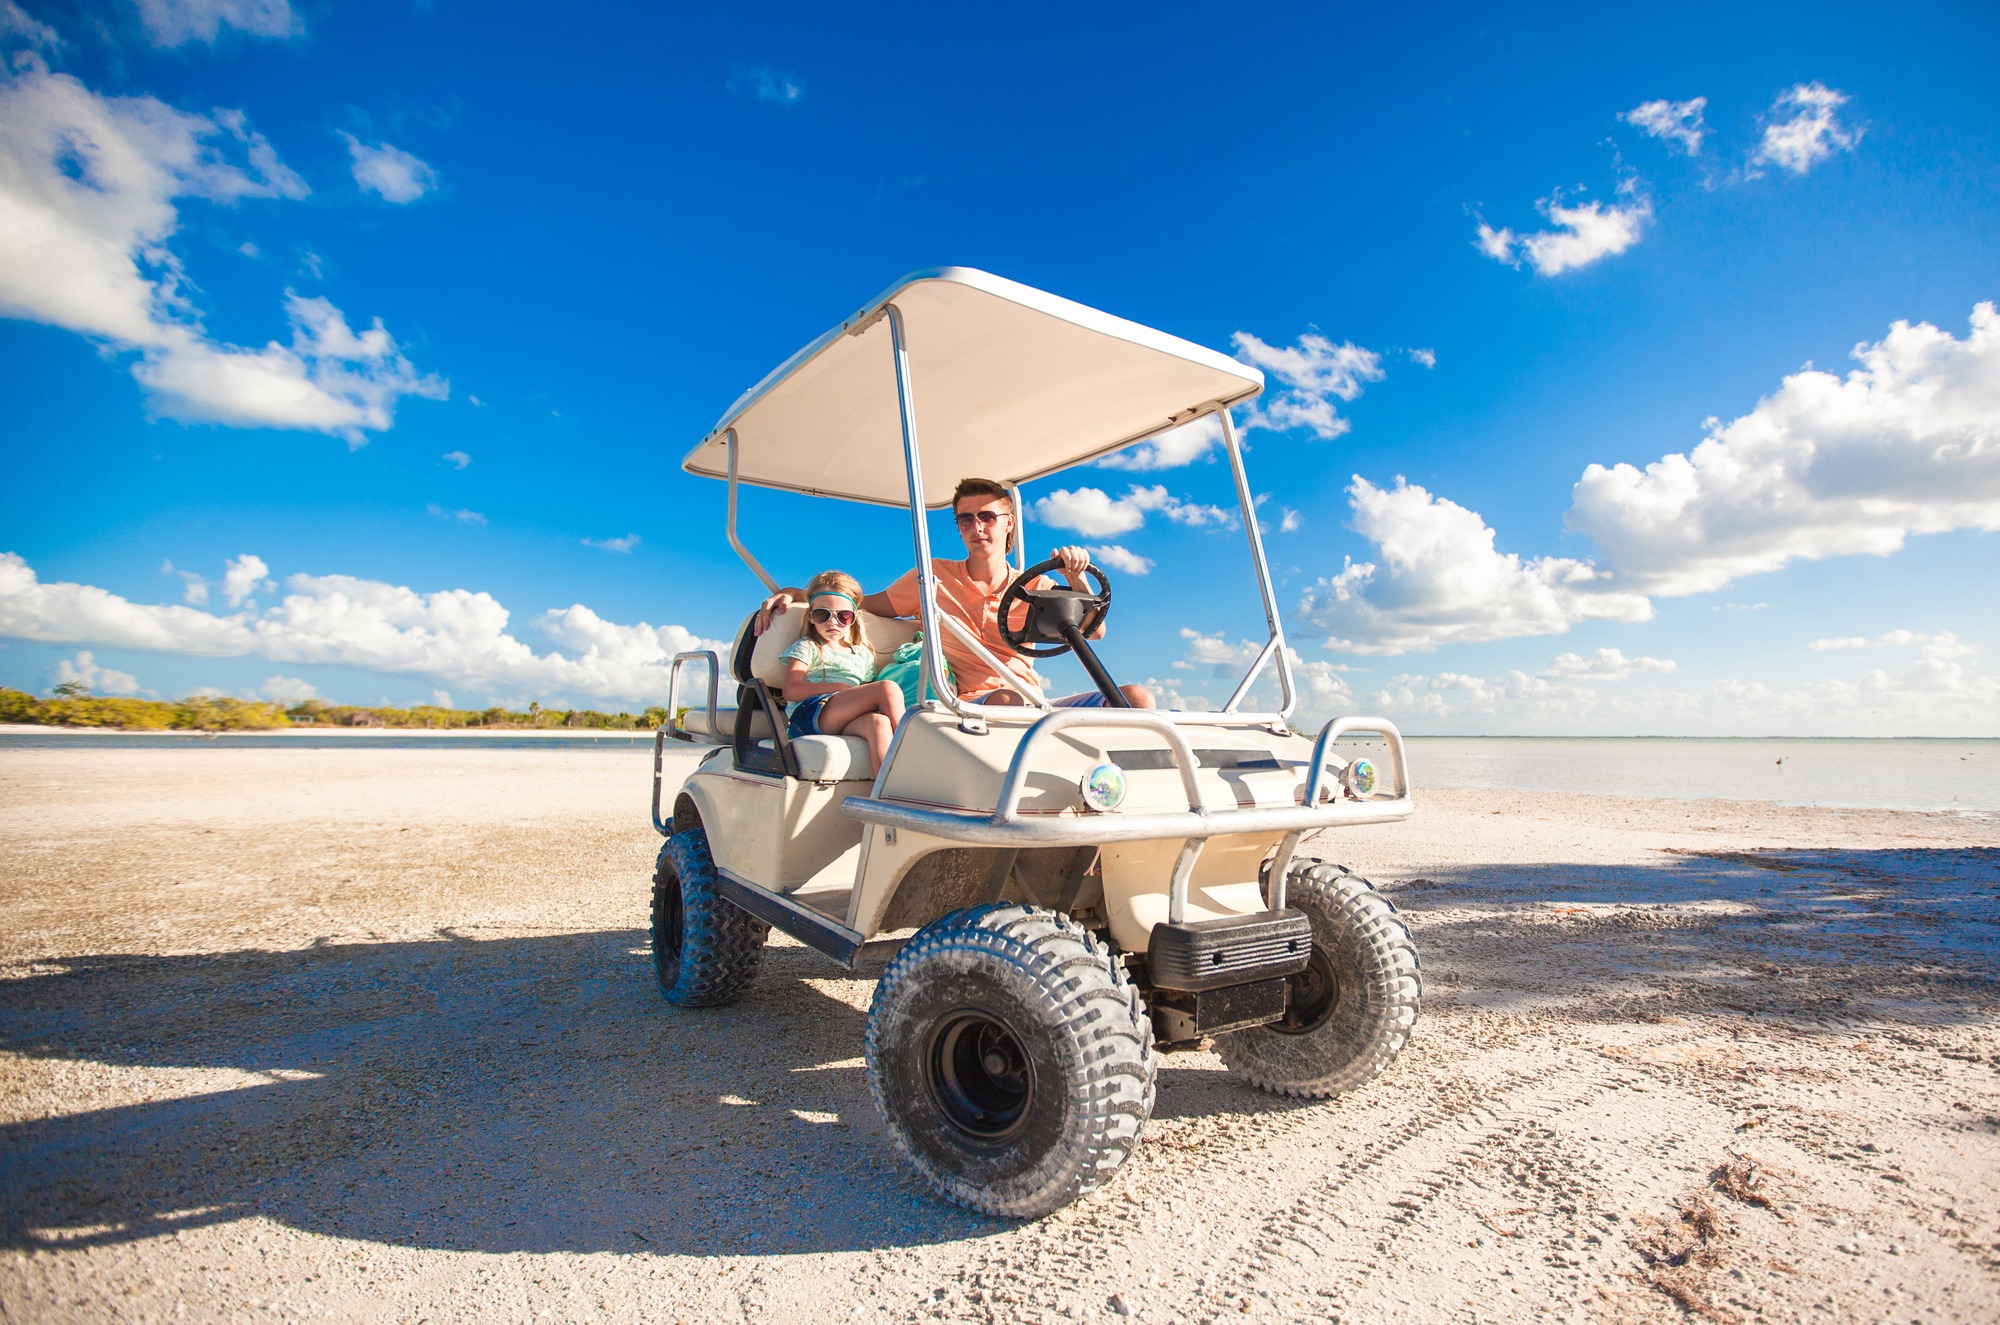 Dad with his two daughters driving golf cart at tropical beach